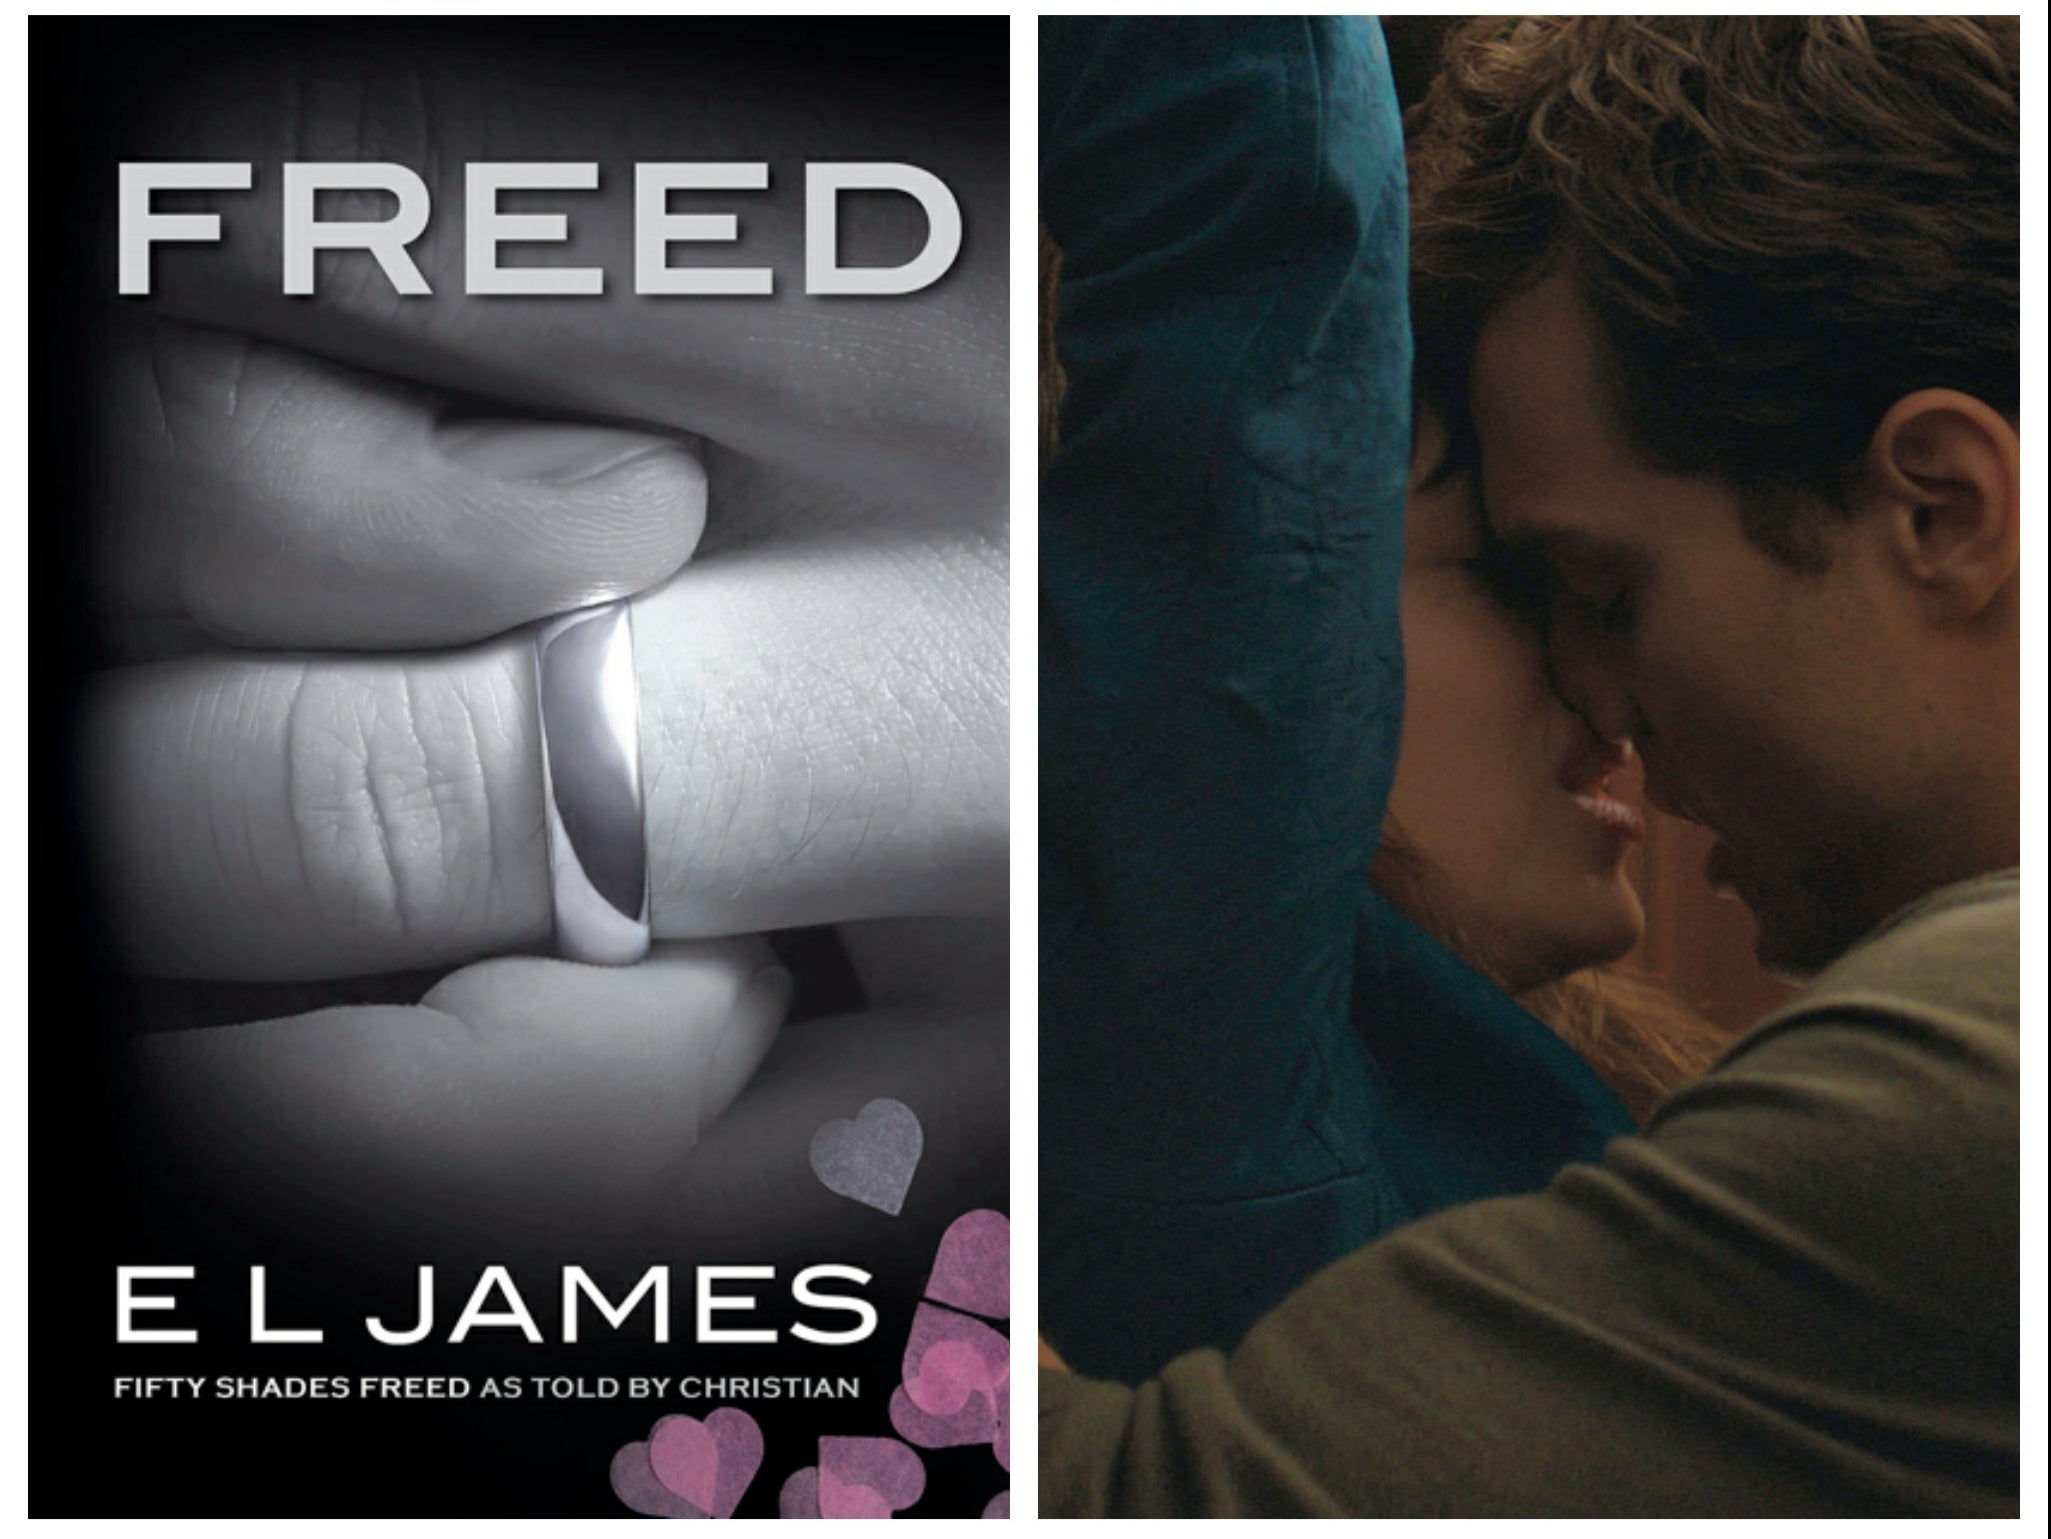 L-R: The cover of ‘Freed’, and Dakota Johnson and Jamie Dornan in the ‘Fifty Shades of Grey’ film